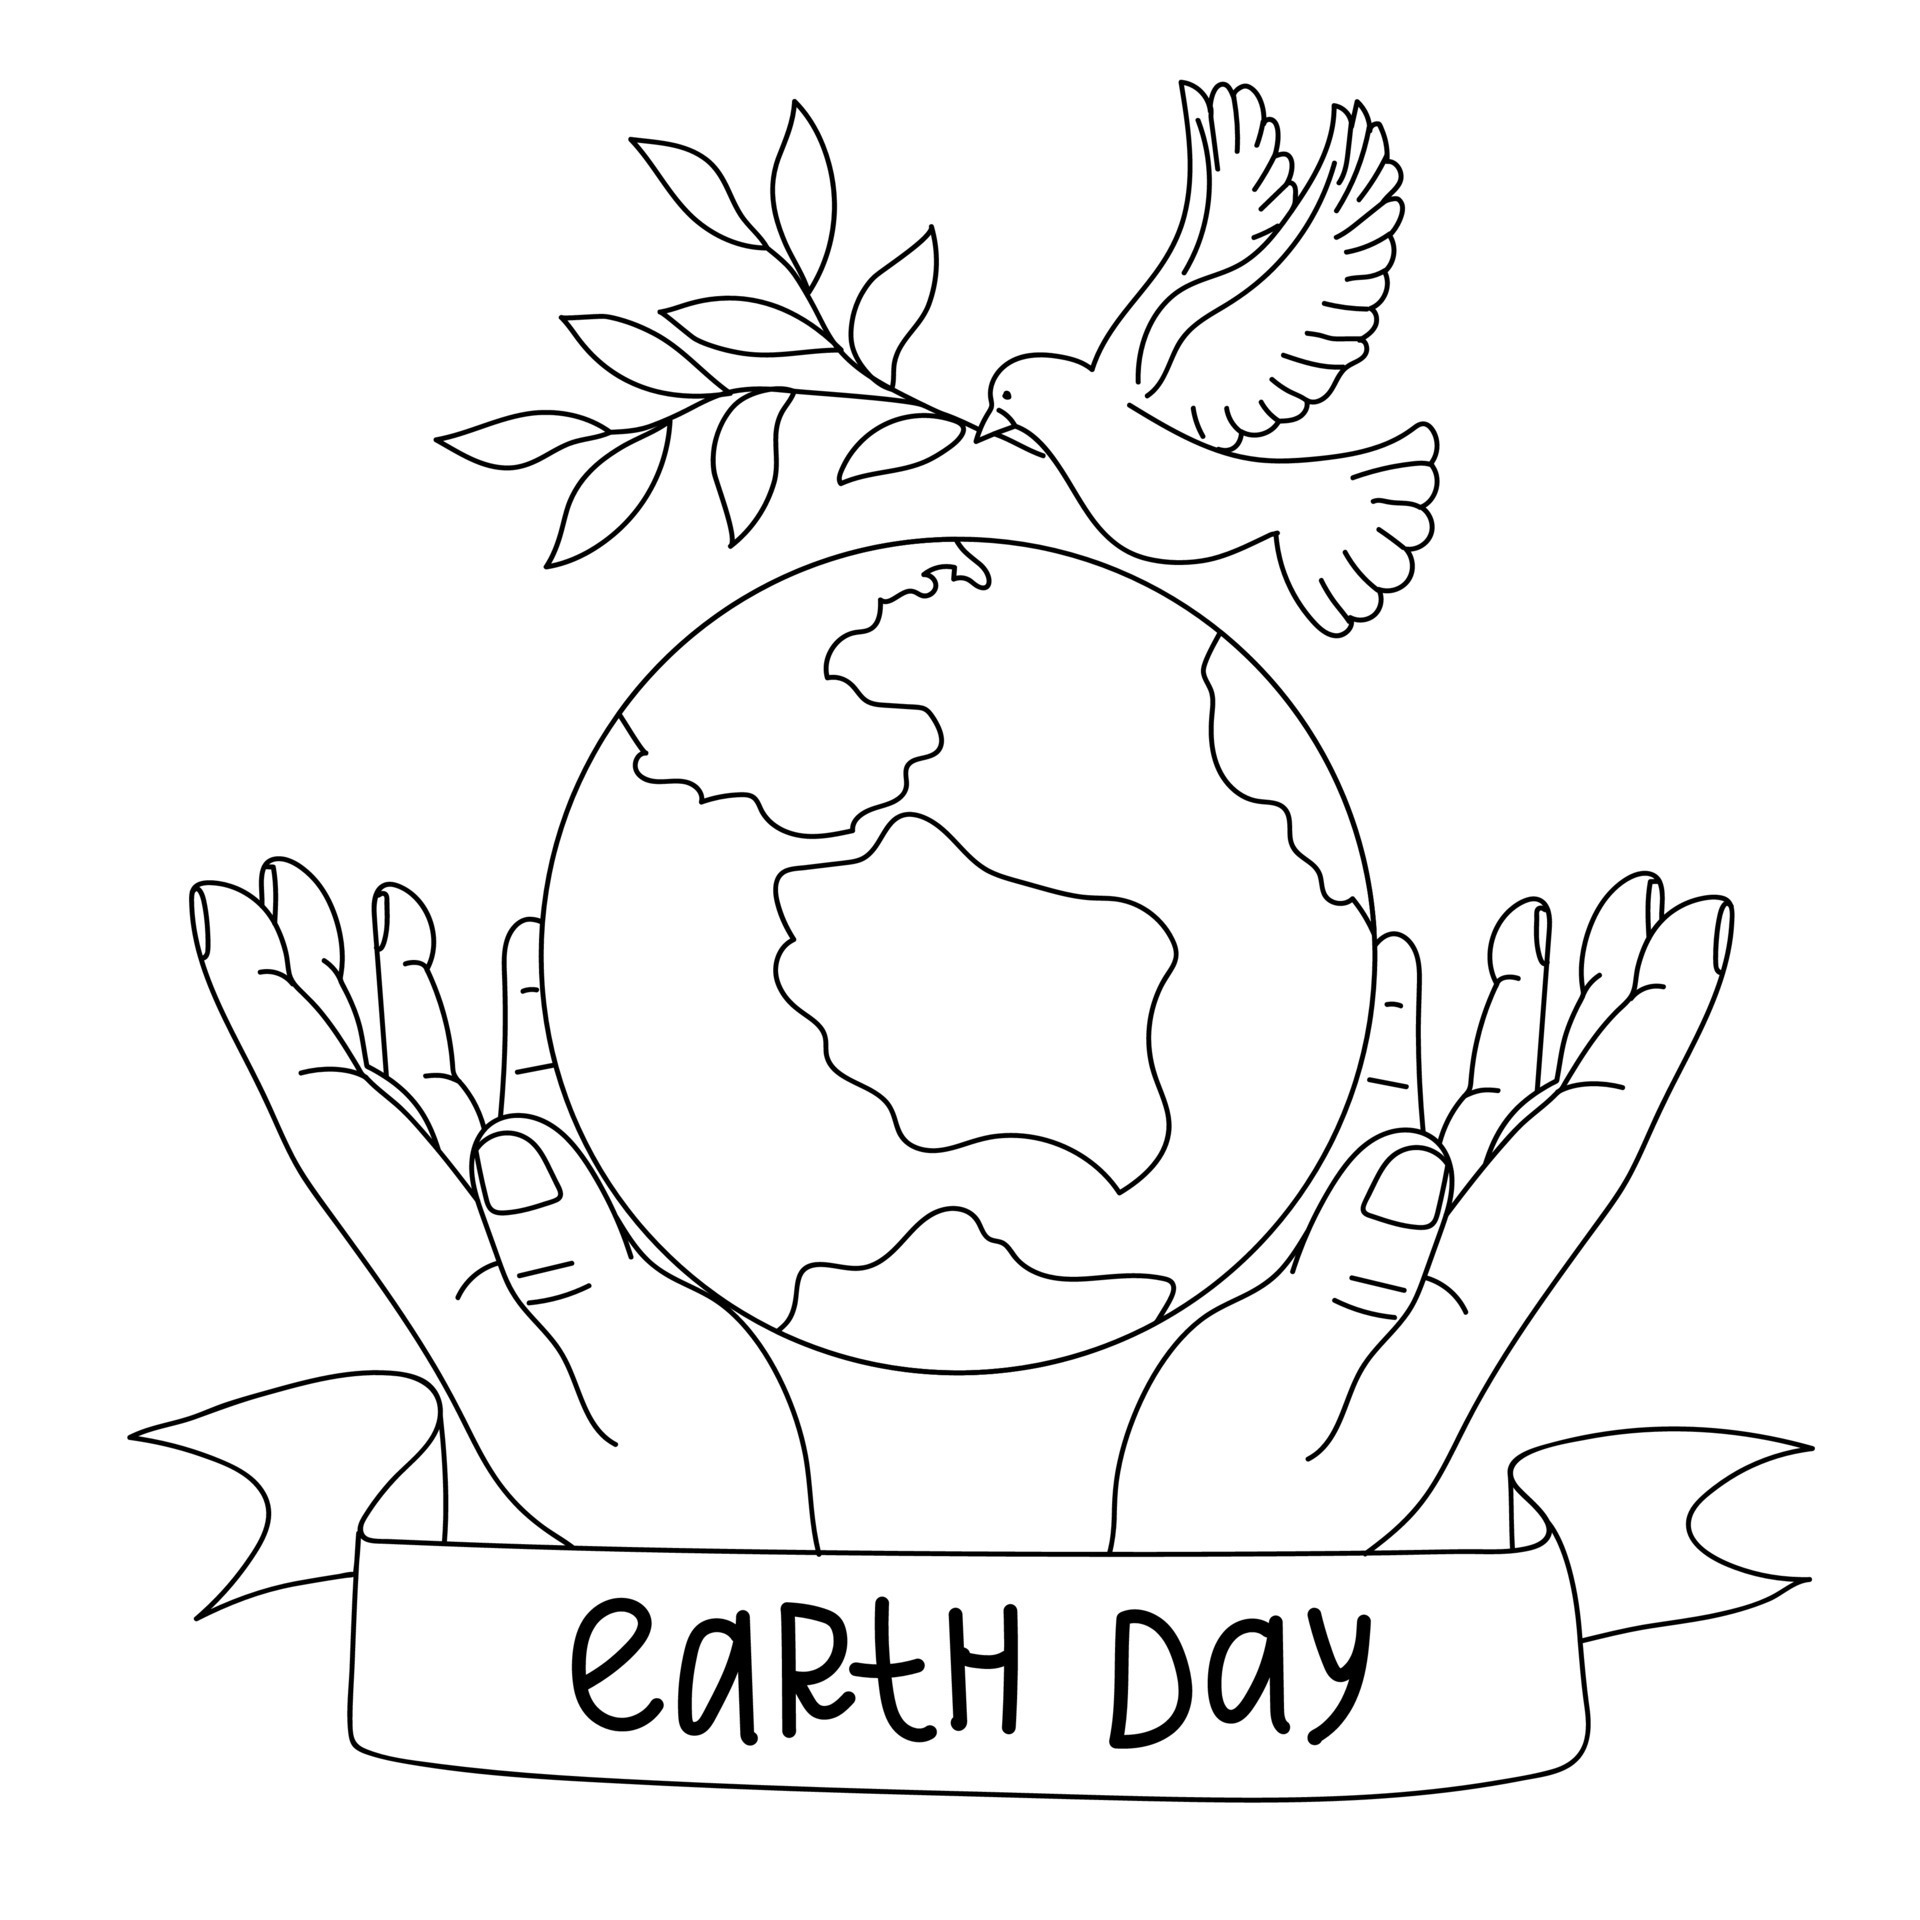 Heart Earth Drawing Coloring Page-suu.vn